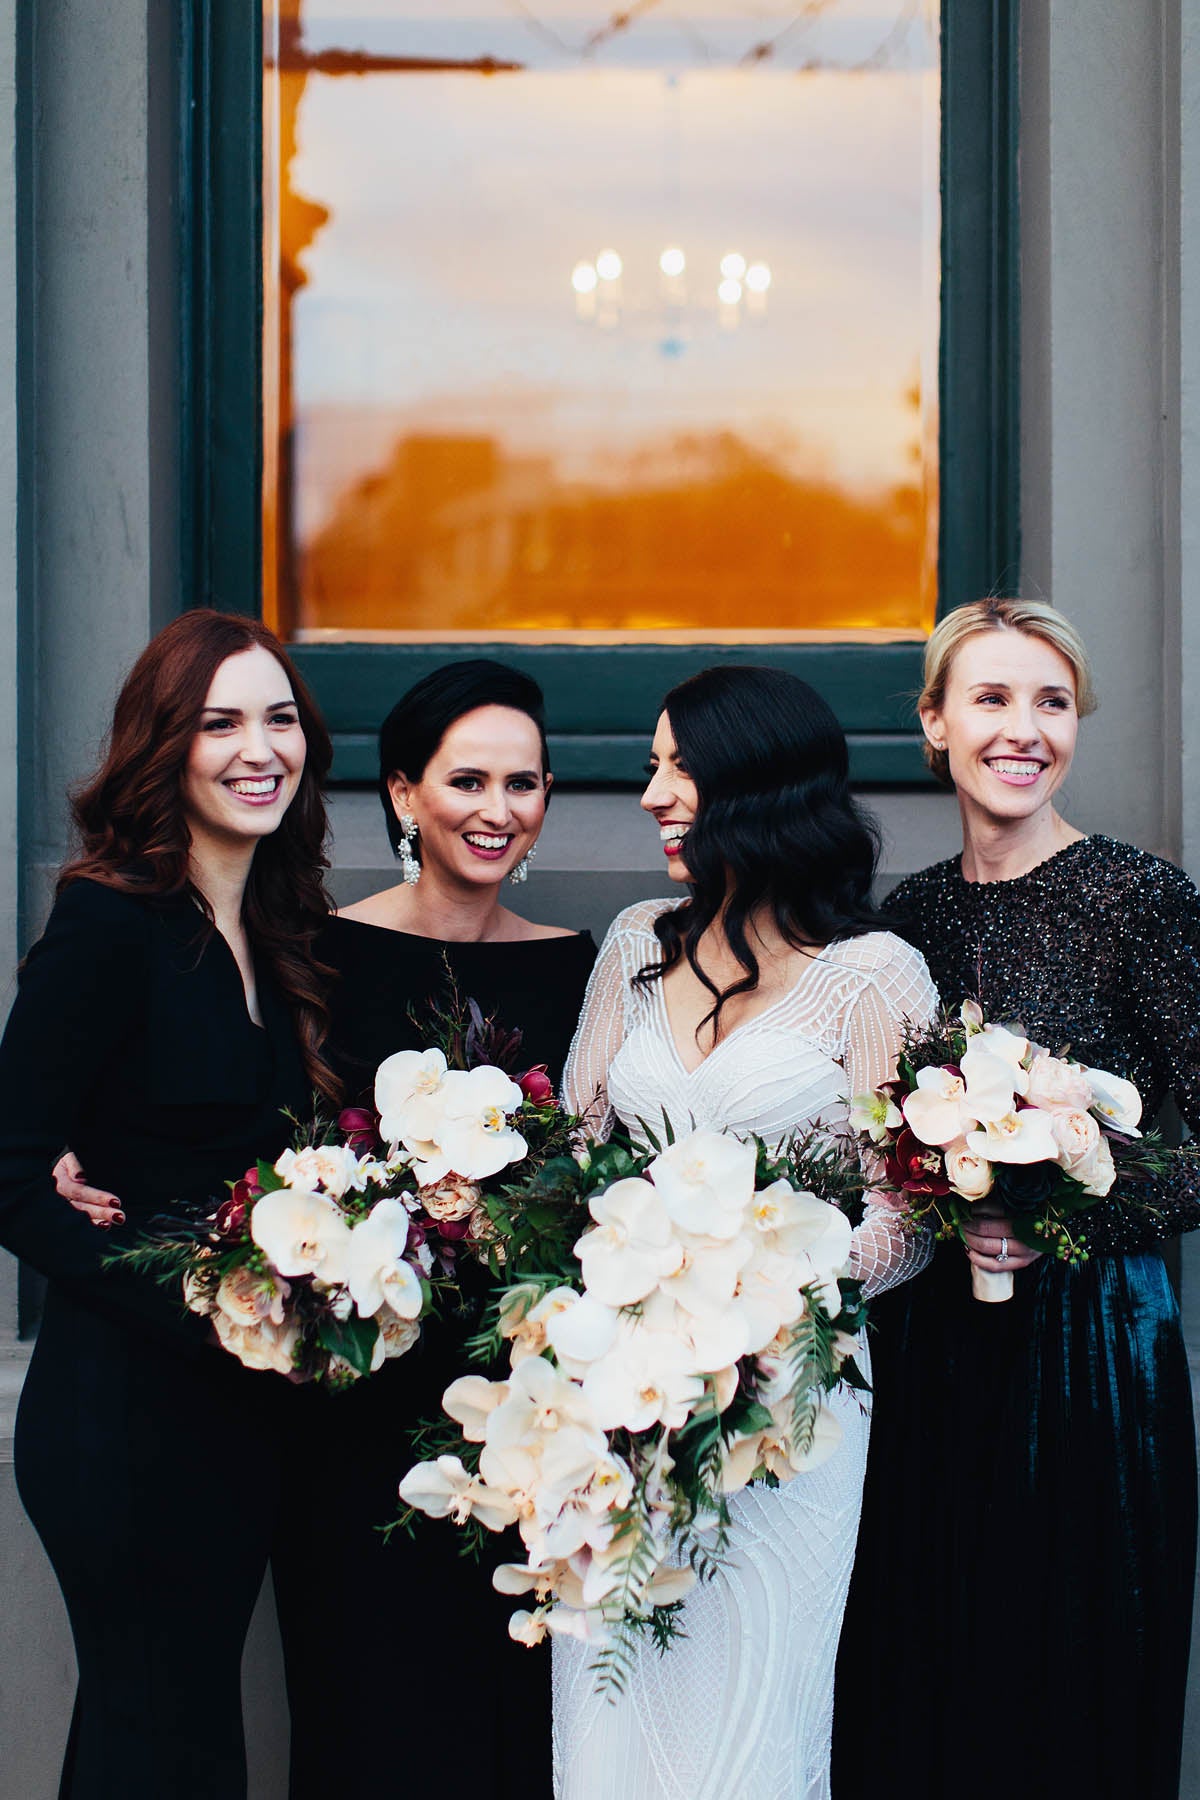 Bridal party holding wedding flowers